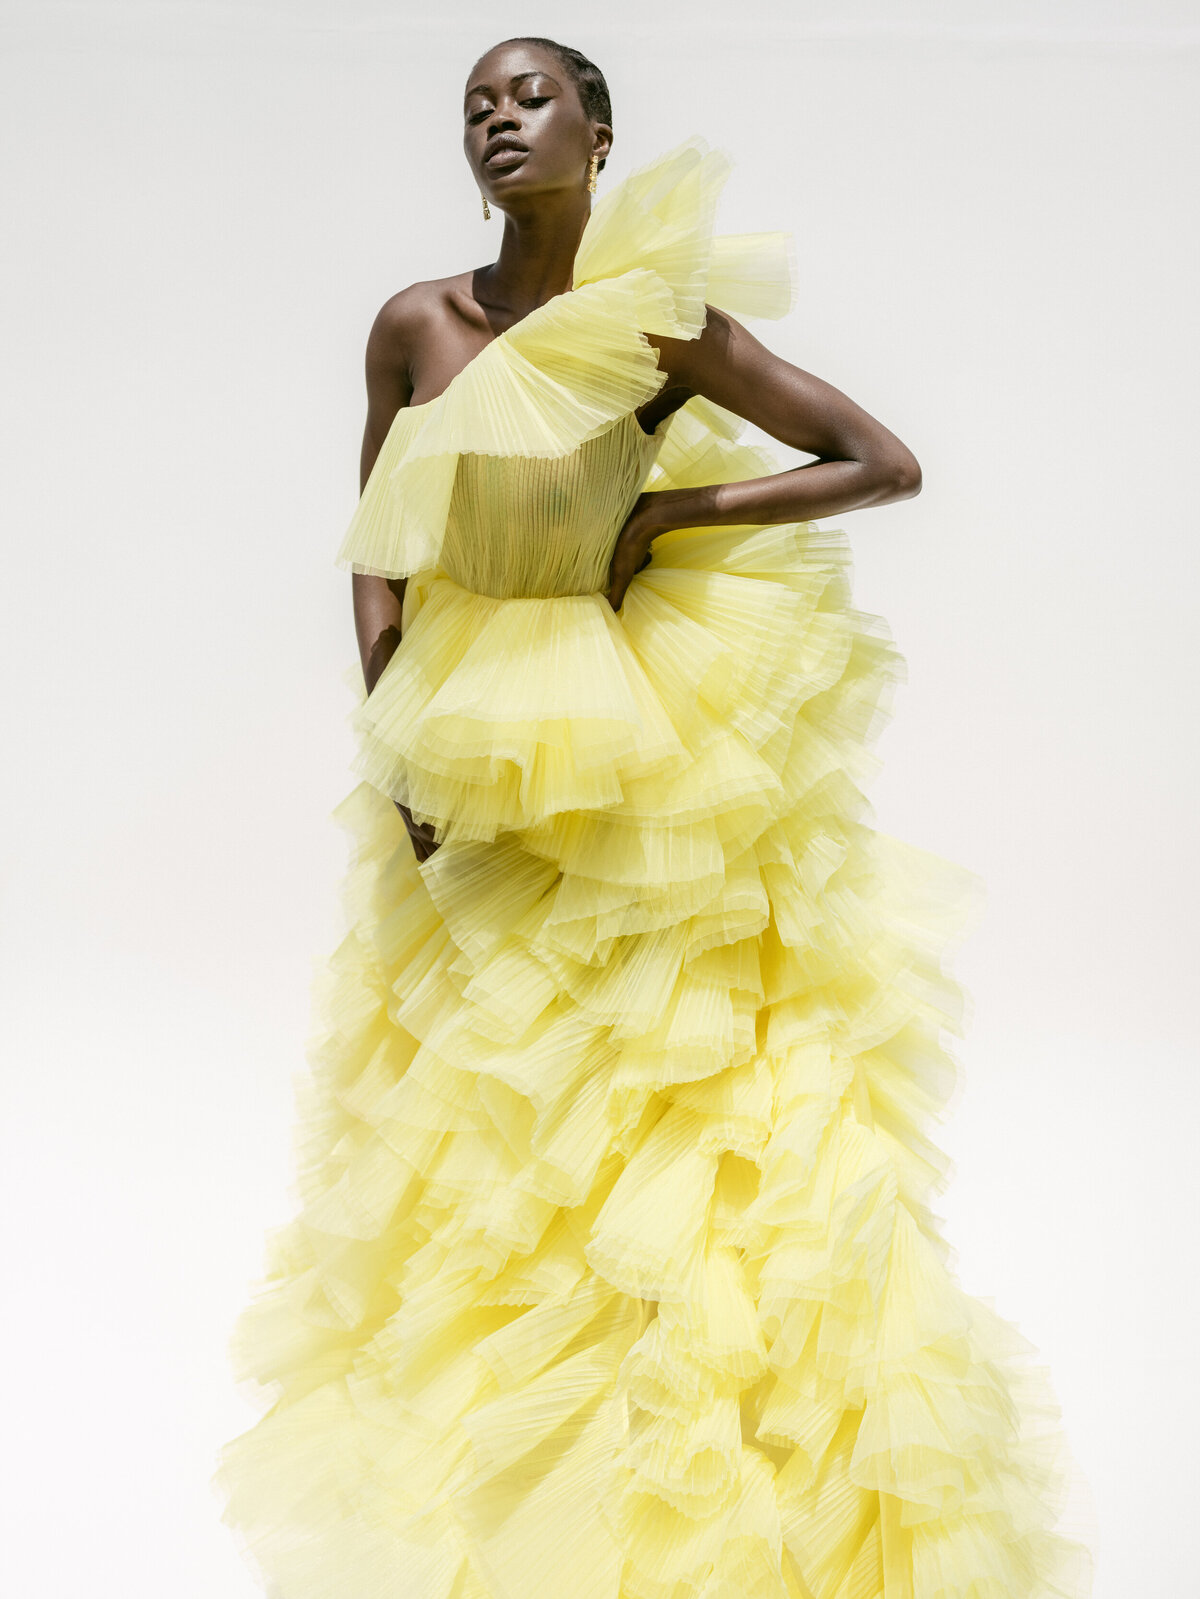 23-KT-Merry-editorial-haute-couture-fashion-georges-hobeika